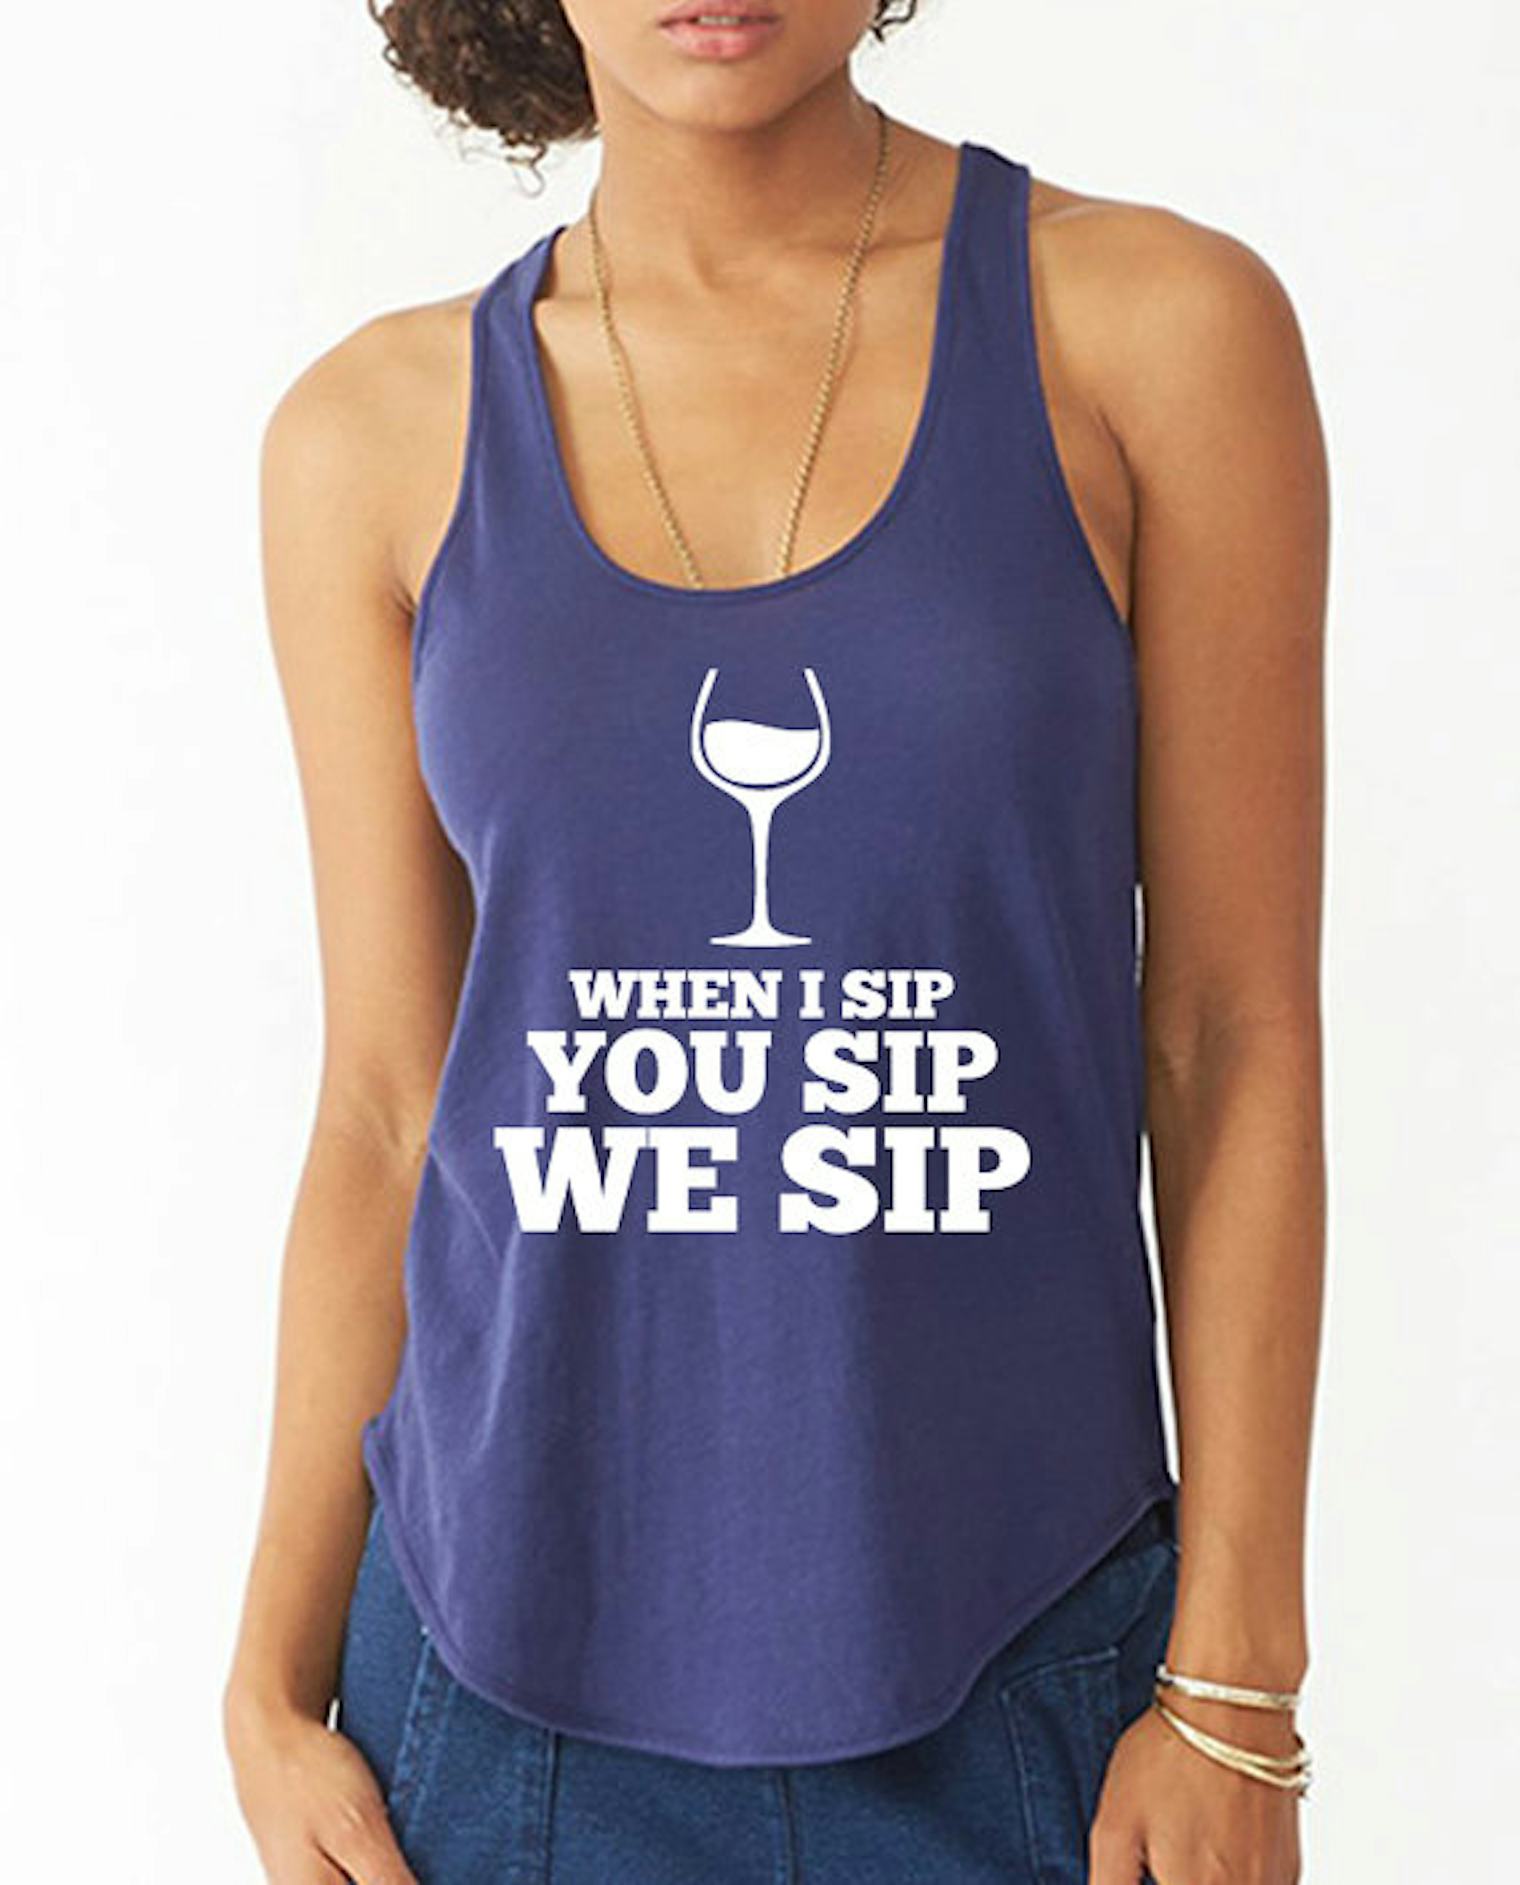 10 Wine-Themed T-Shirts Perfect For The Oenophile In Your Life (AKA You)